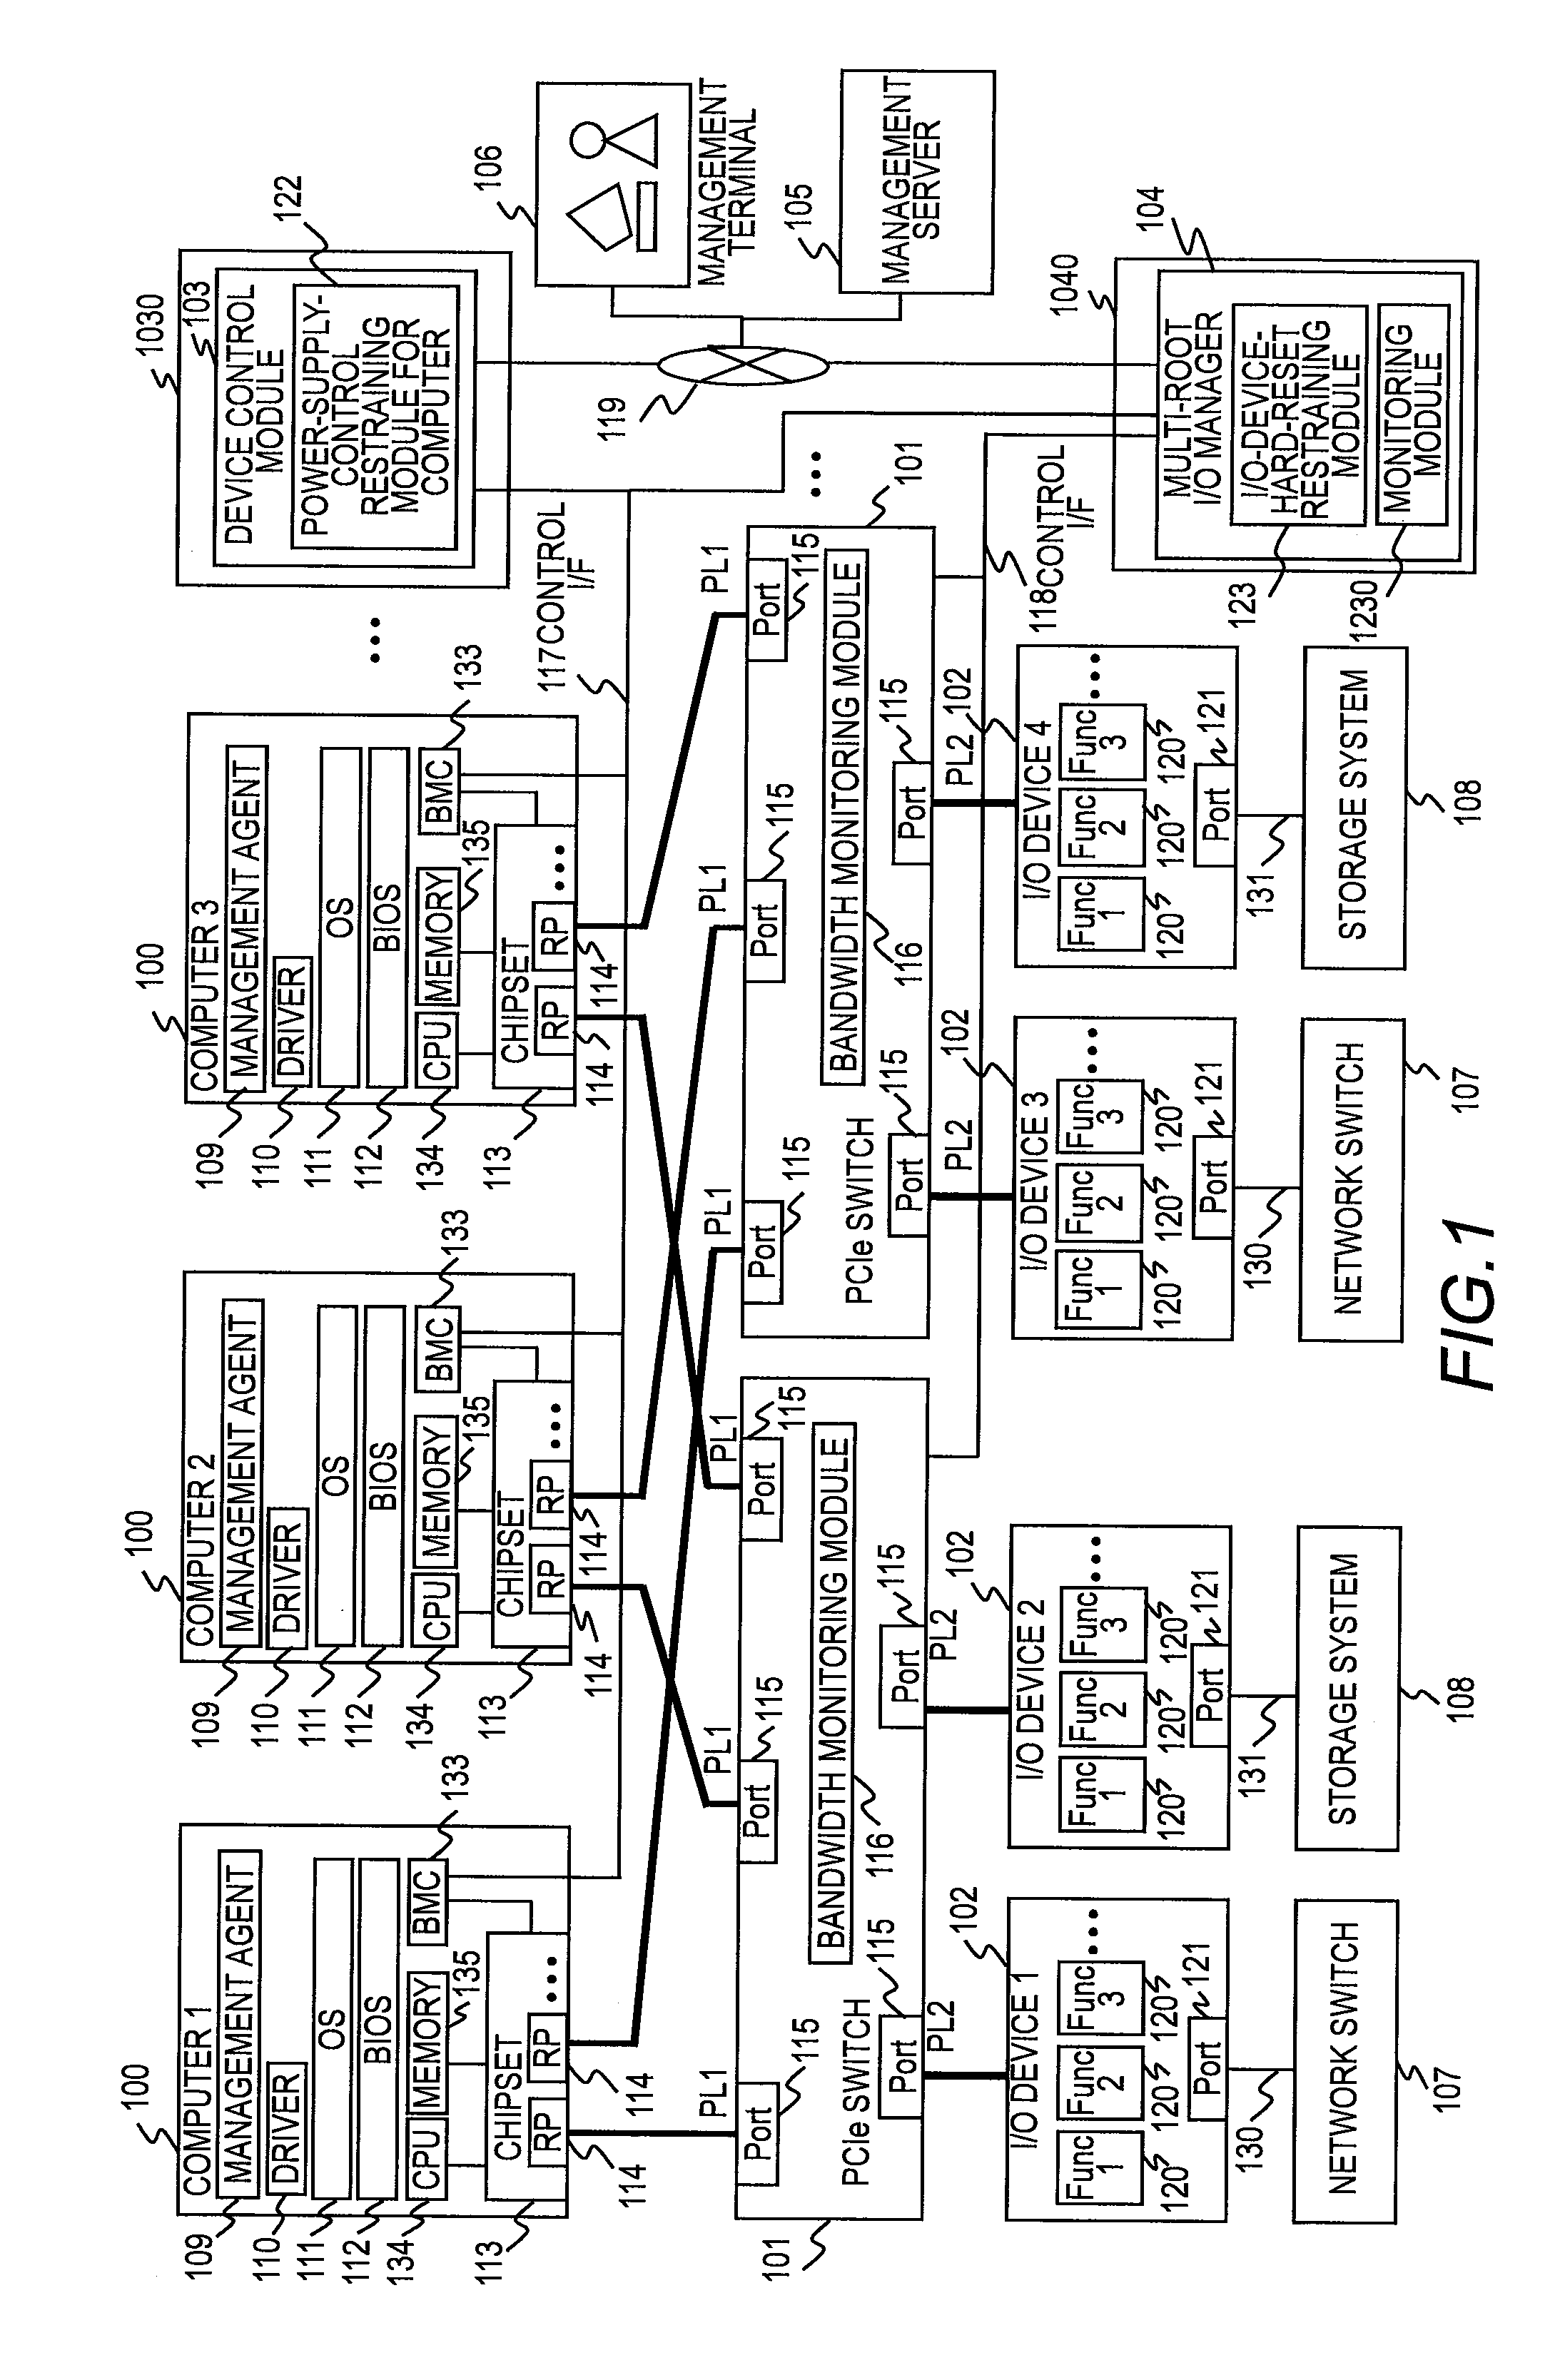 Compound computer system and method for sharing PCI devices thereof